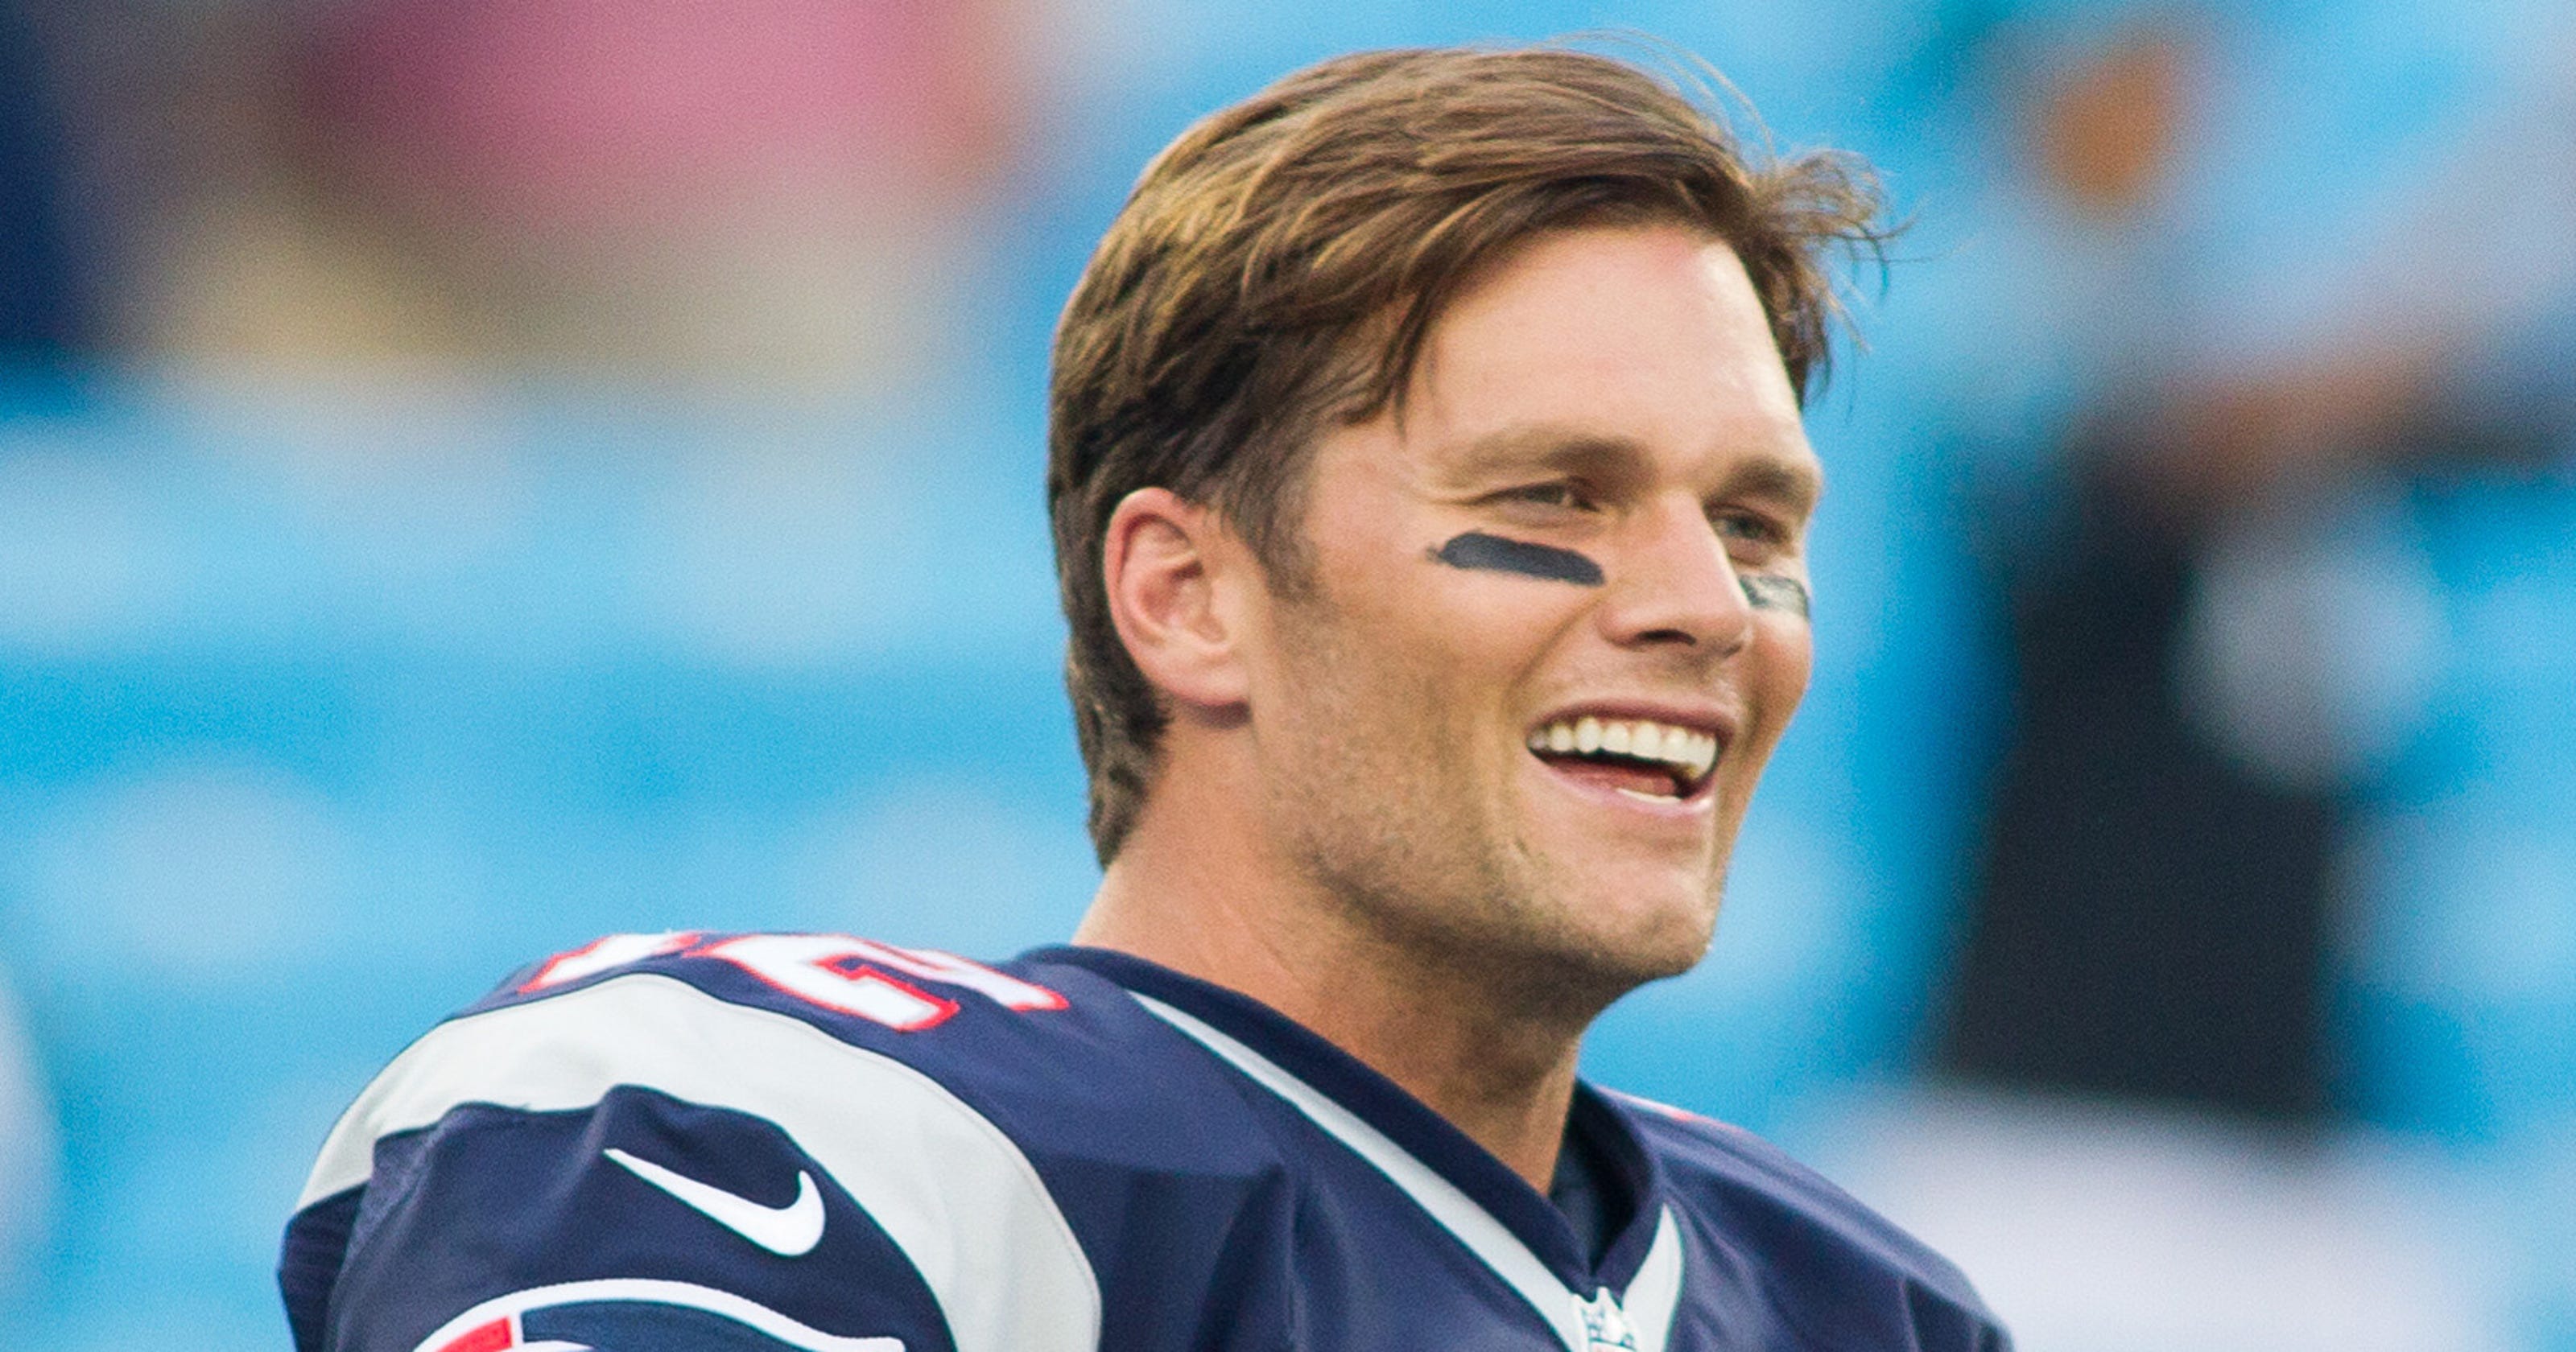 Tom Brady back to business with Deflategate suspension over3200 x 1680